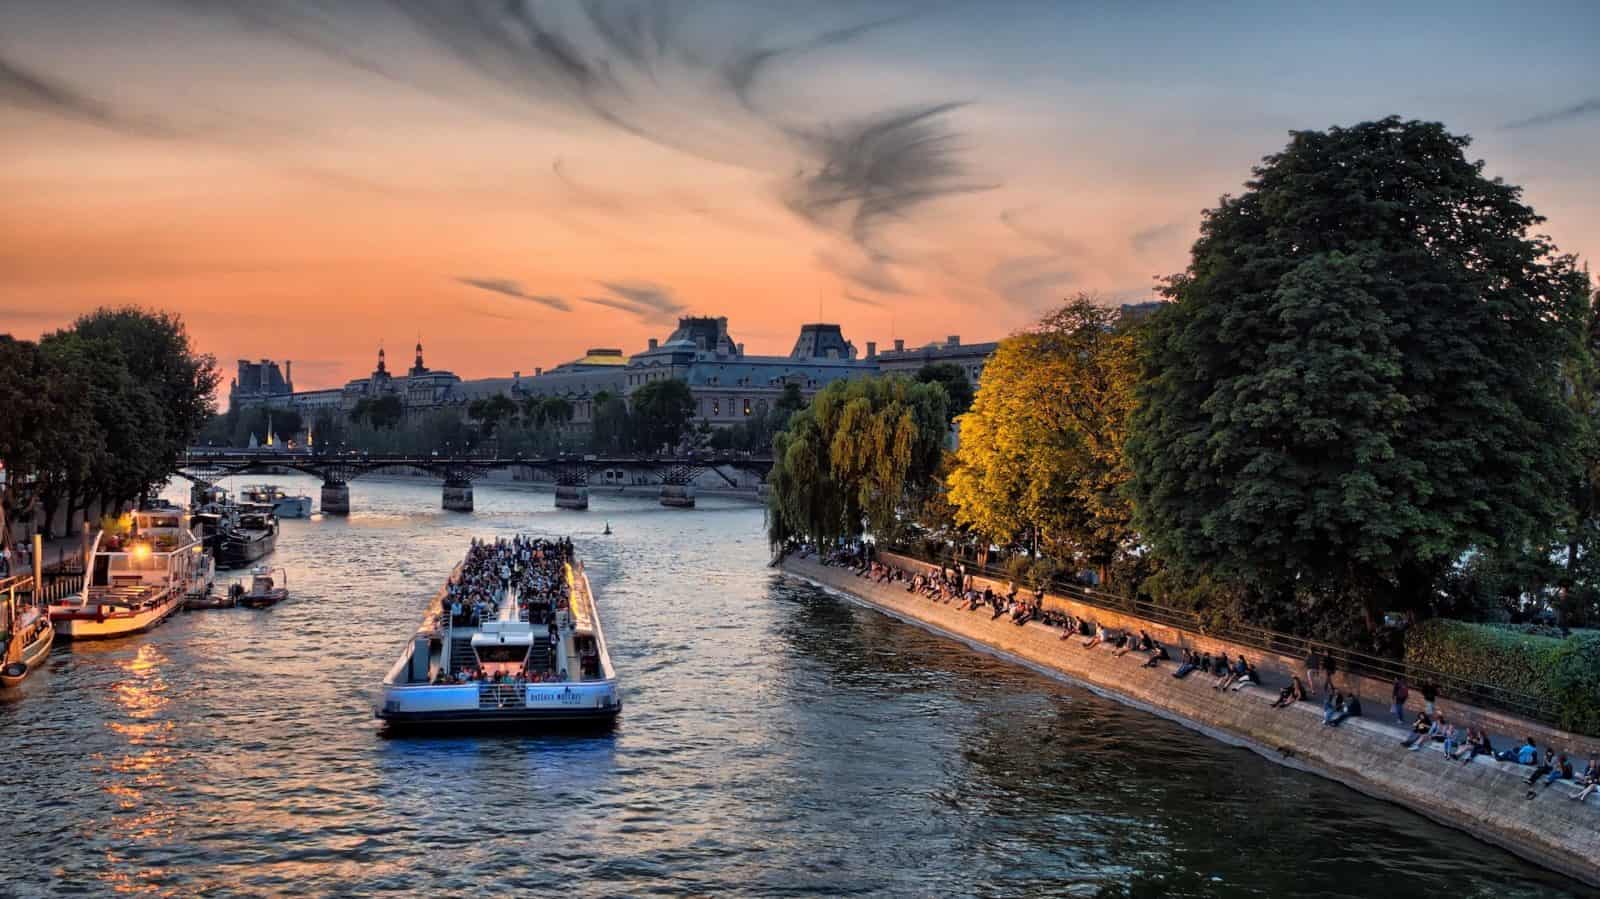 Happy New Year 2020! A Look Back at HiP Paris’s Best Posts of 2019